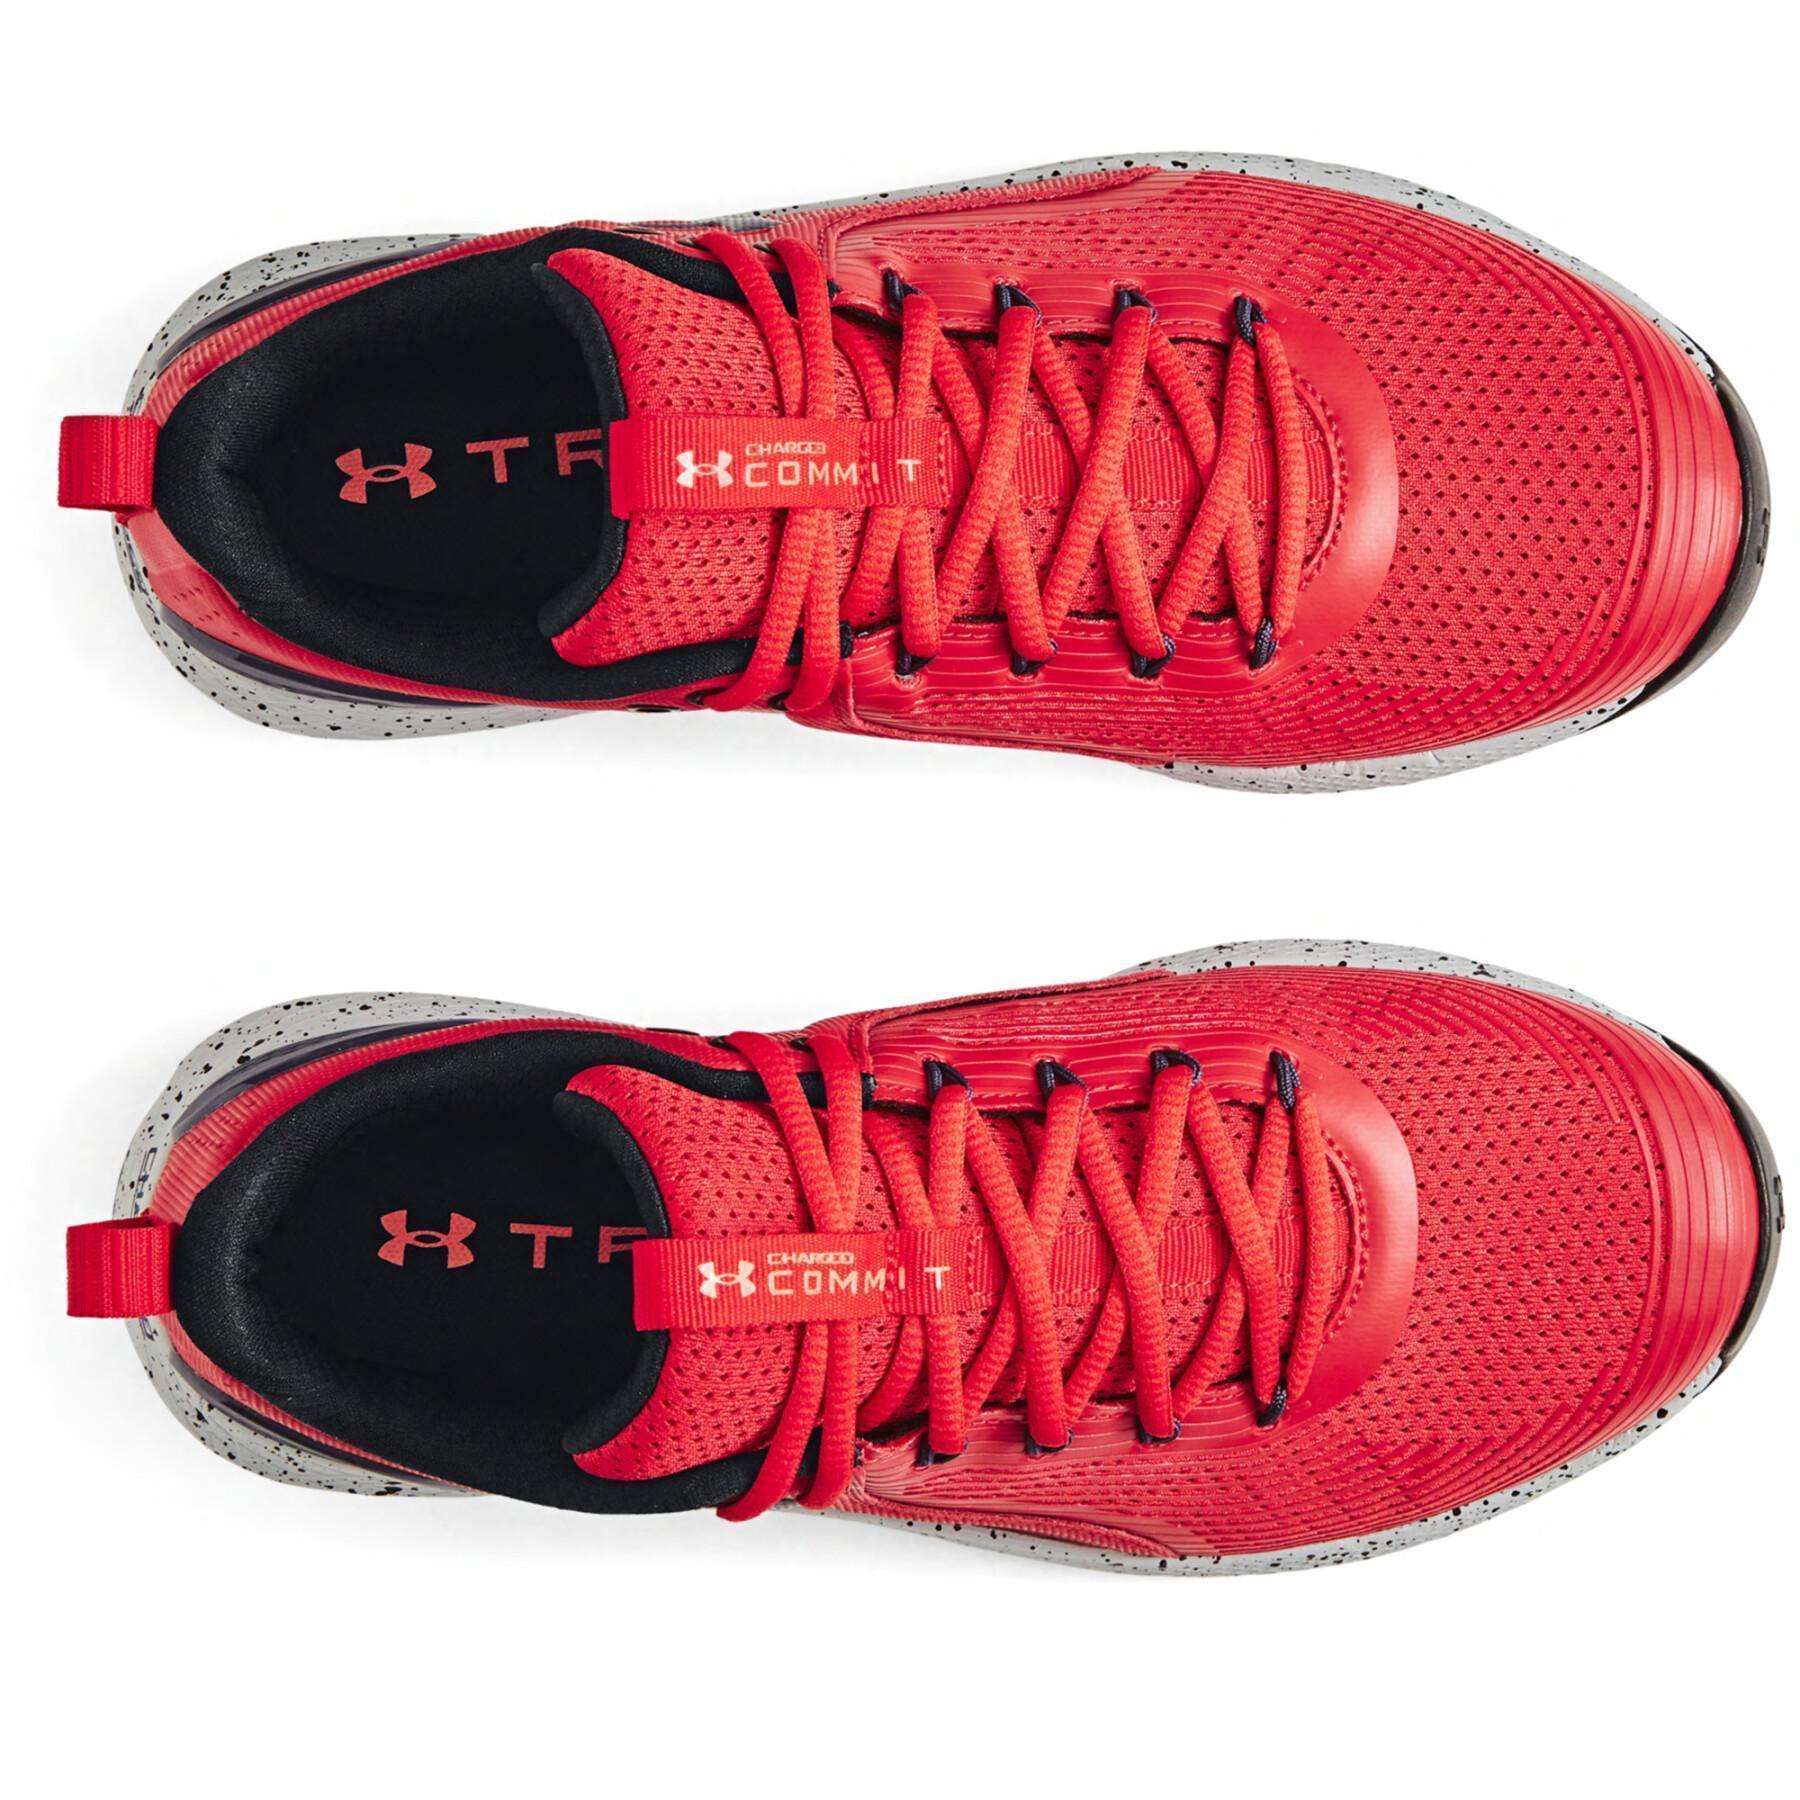 Cross training shoes Under Armour Charged Commit TR 3